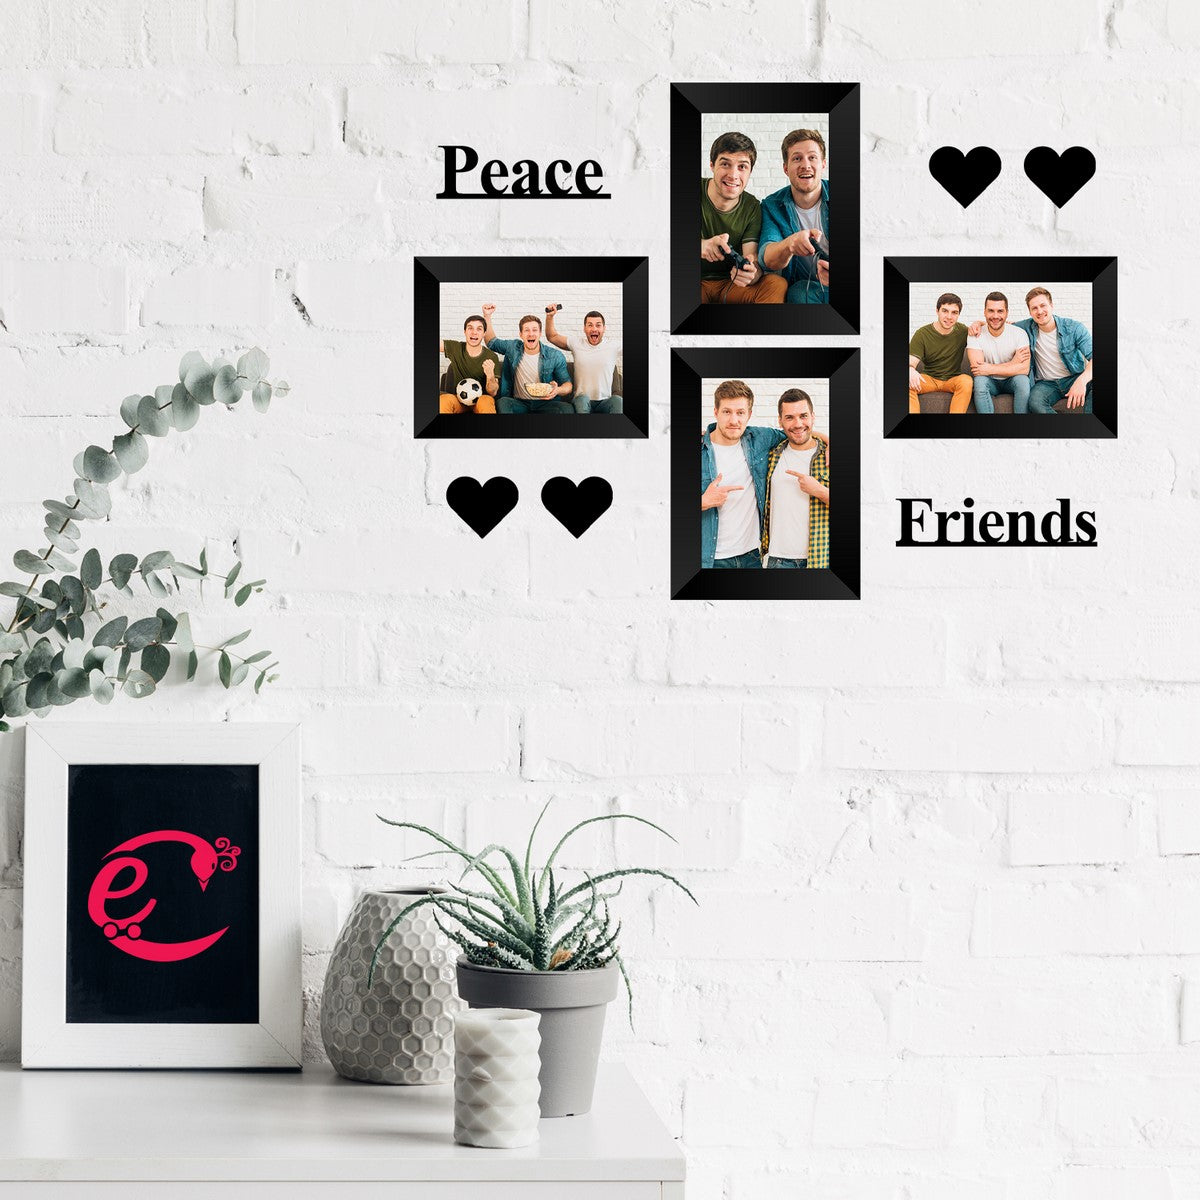 Memory Wall Collage Photo Frame - Set of 4 Photo Frames for 4 Photos of 5"x7", 1 Piece of PEACE, 1 Piece of FRIENDS, 4 Pieces of HEARTS 1